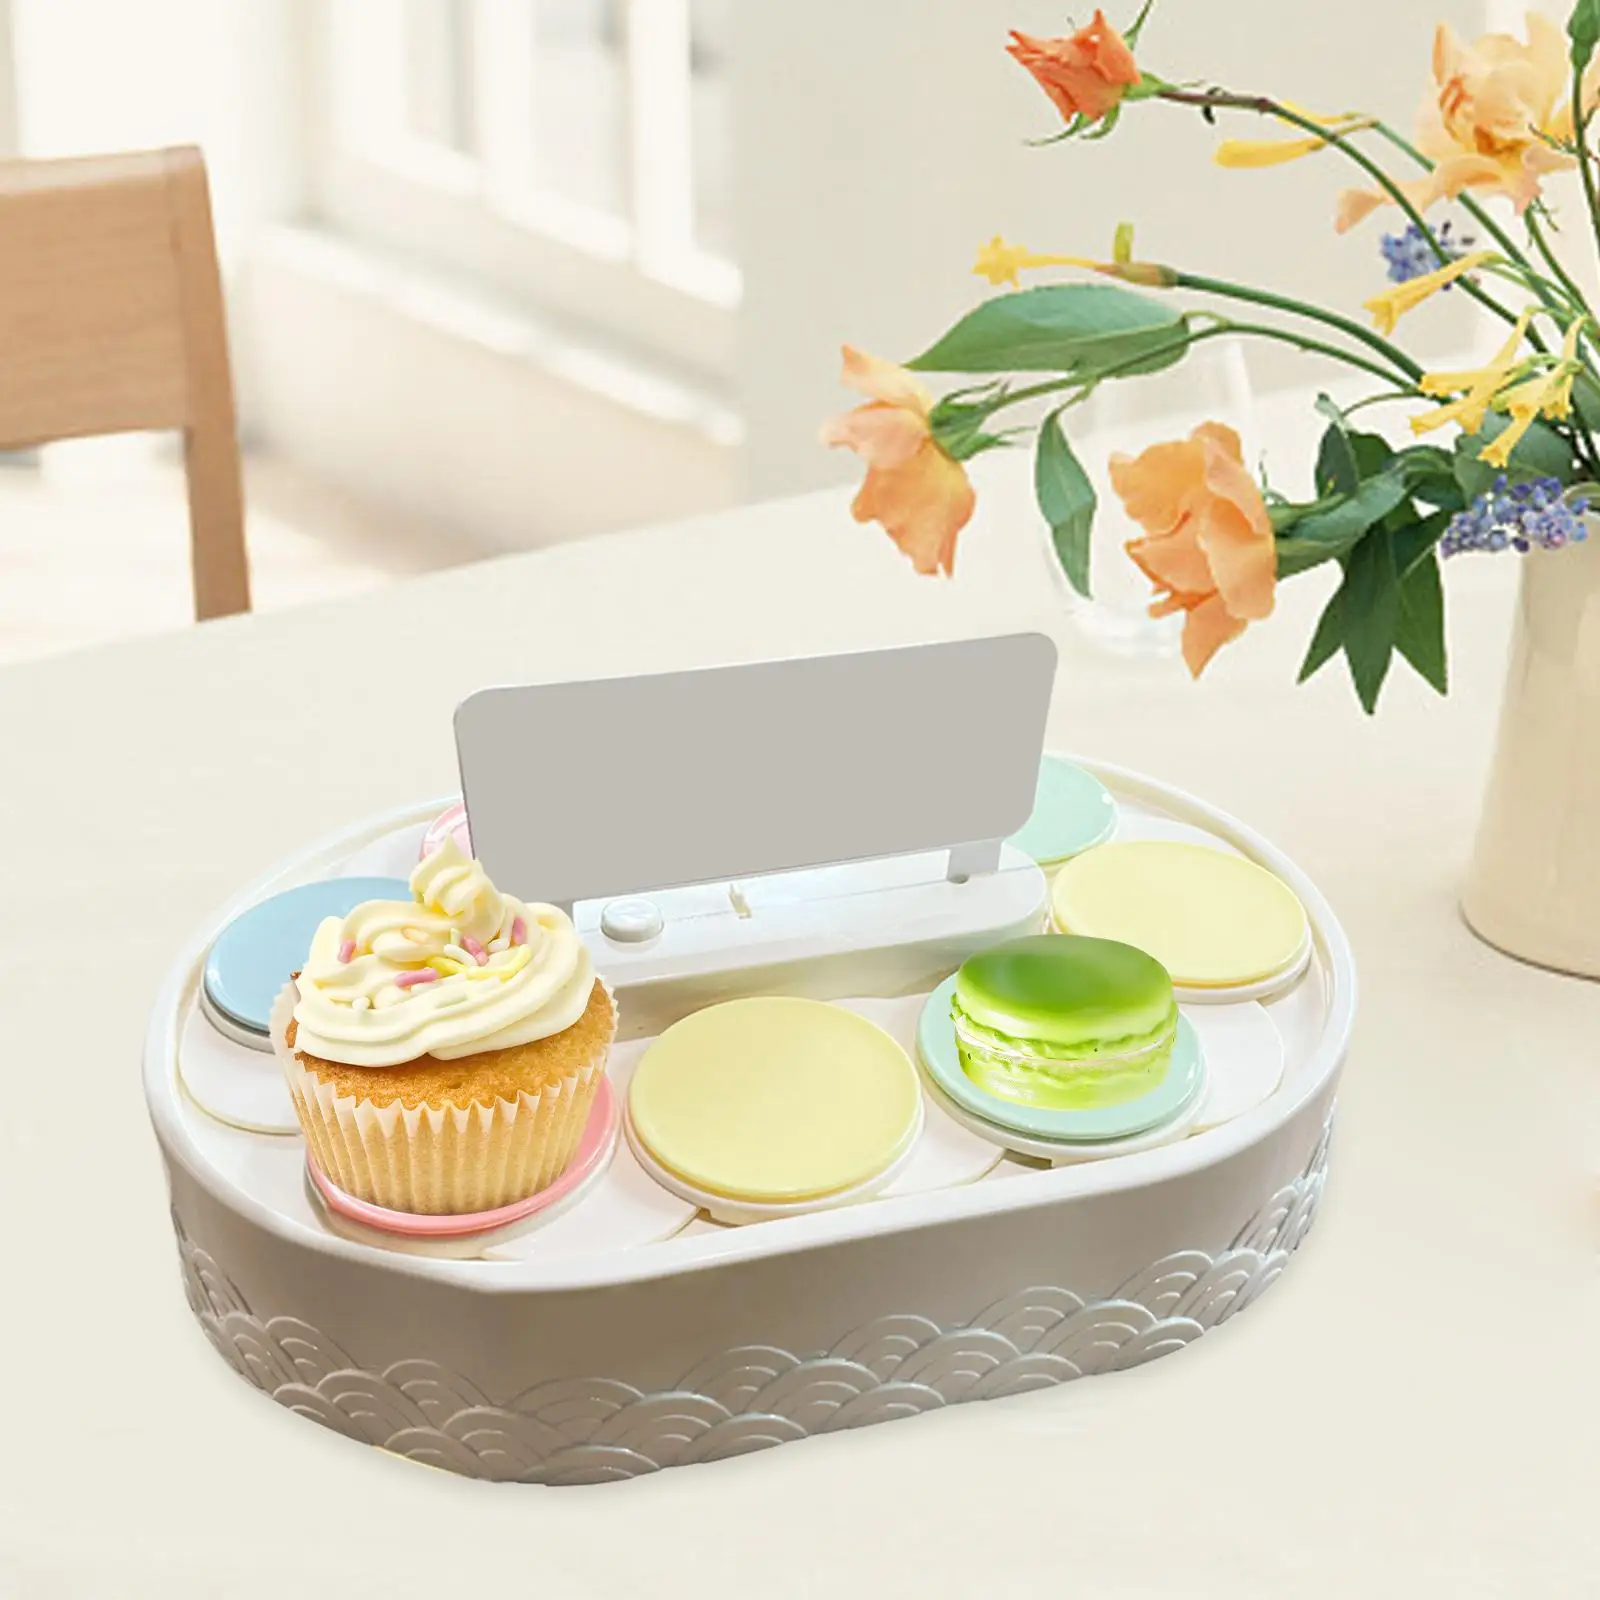 Tabletop Rotating Sushi Machine Swing Tray Dessert Stand Cookie Cupcake Holder for Home Event Desserts Cupcakes Festival